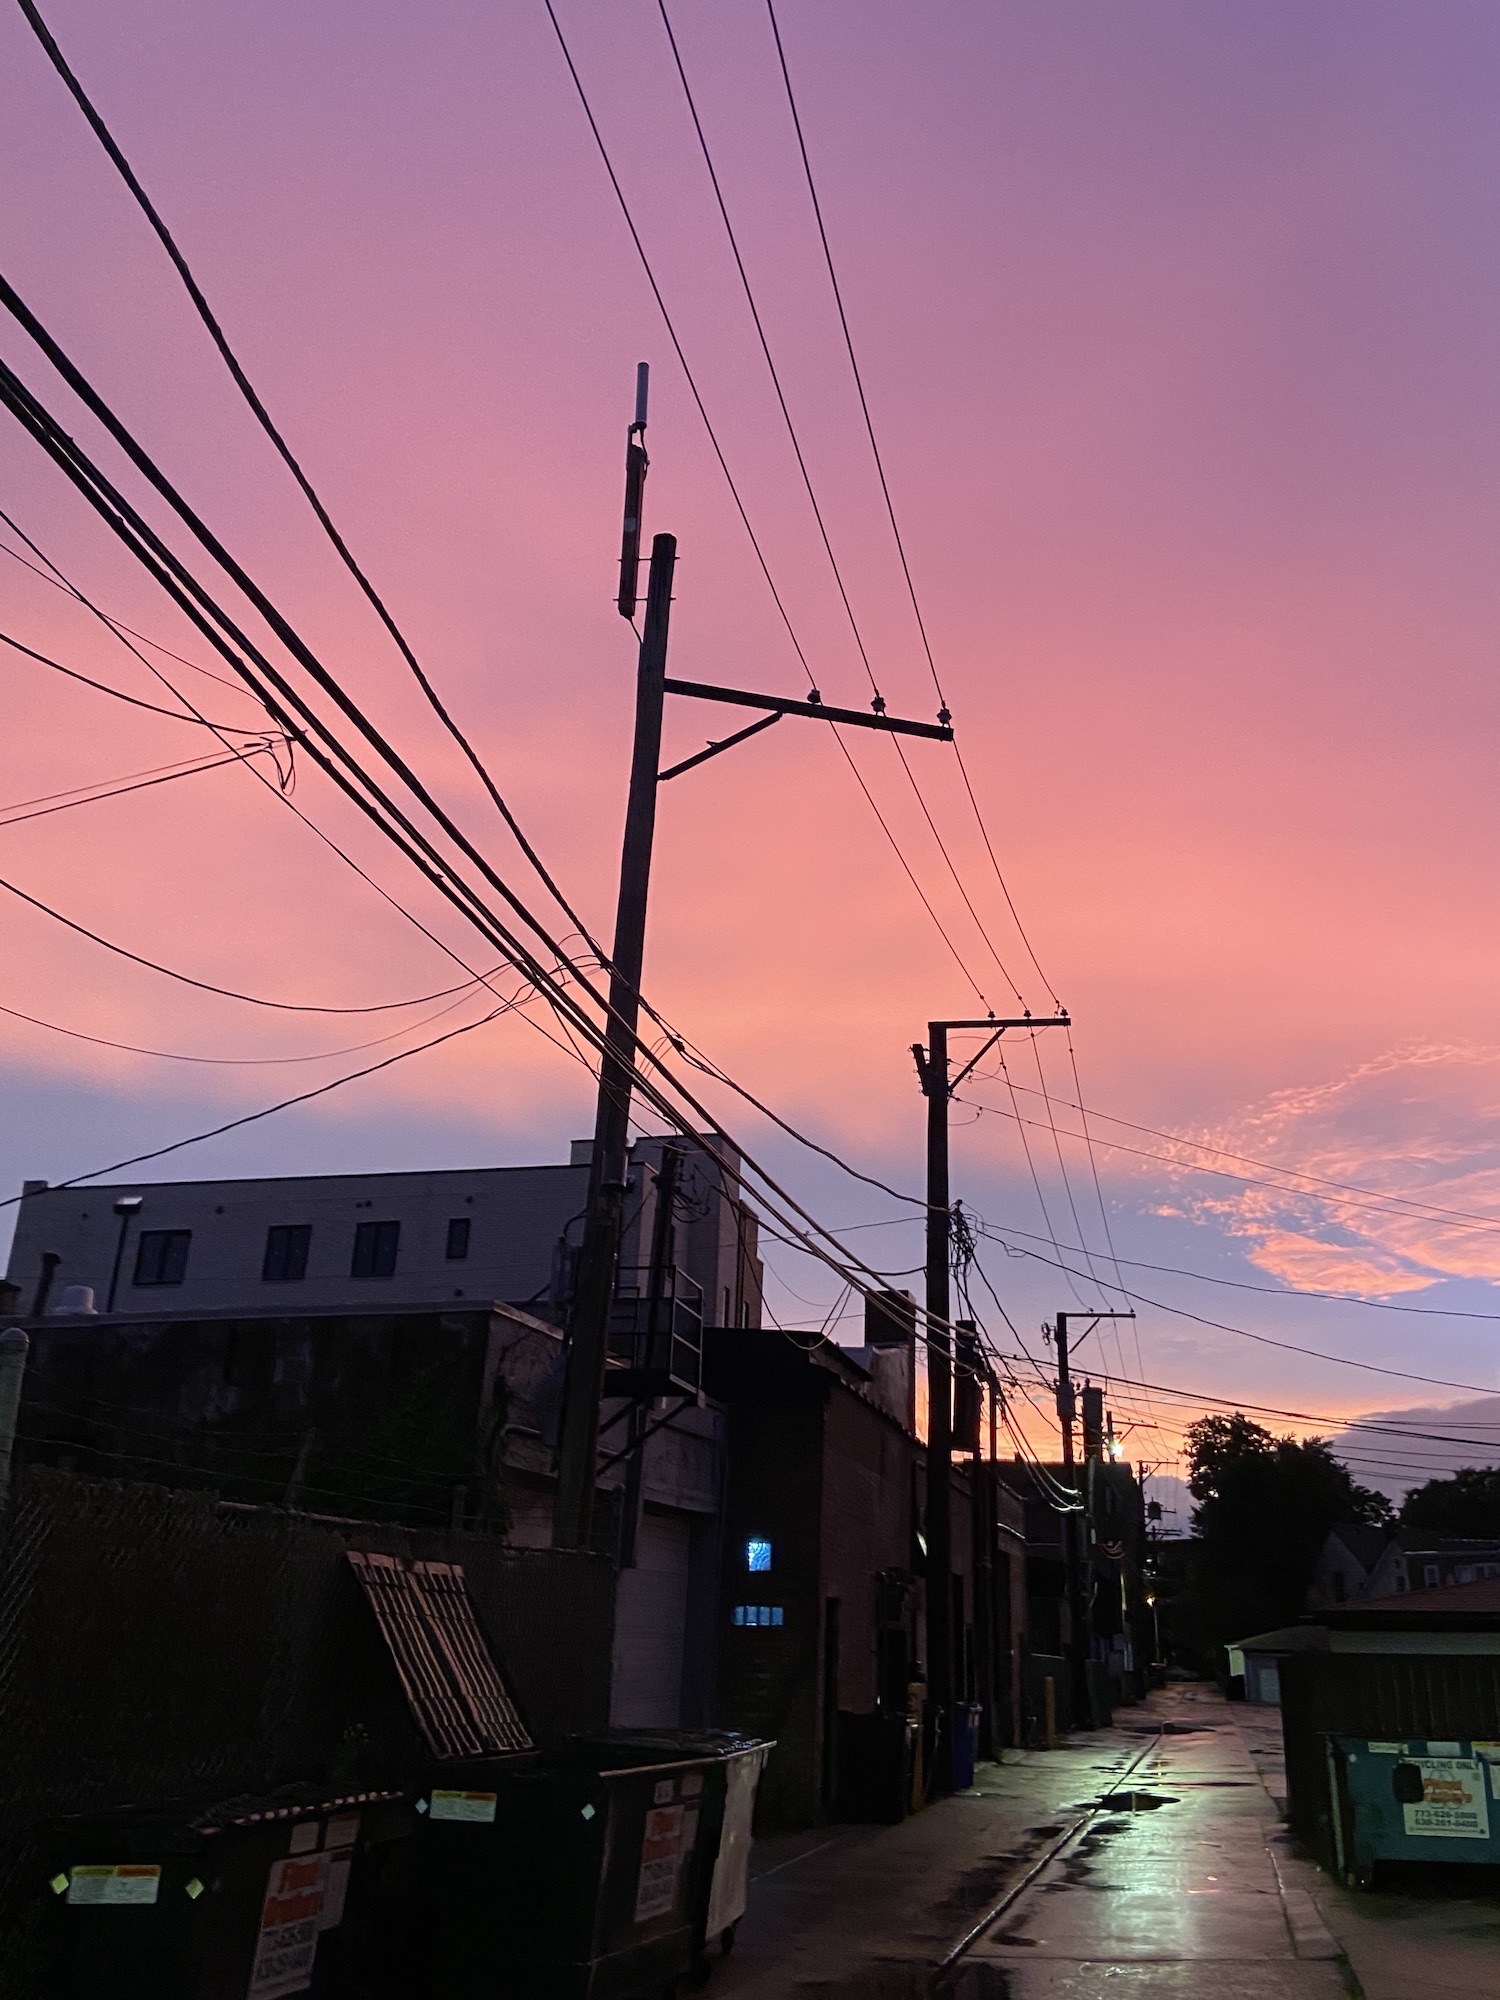 A pink sunset seen in an alley in Chicago in June 2020.